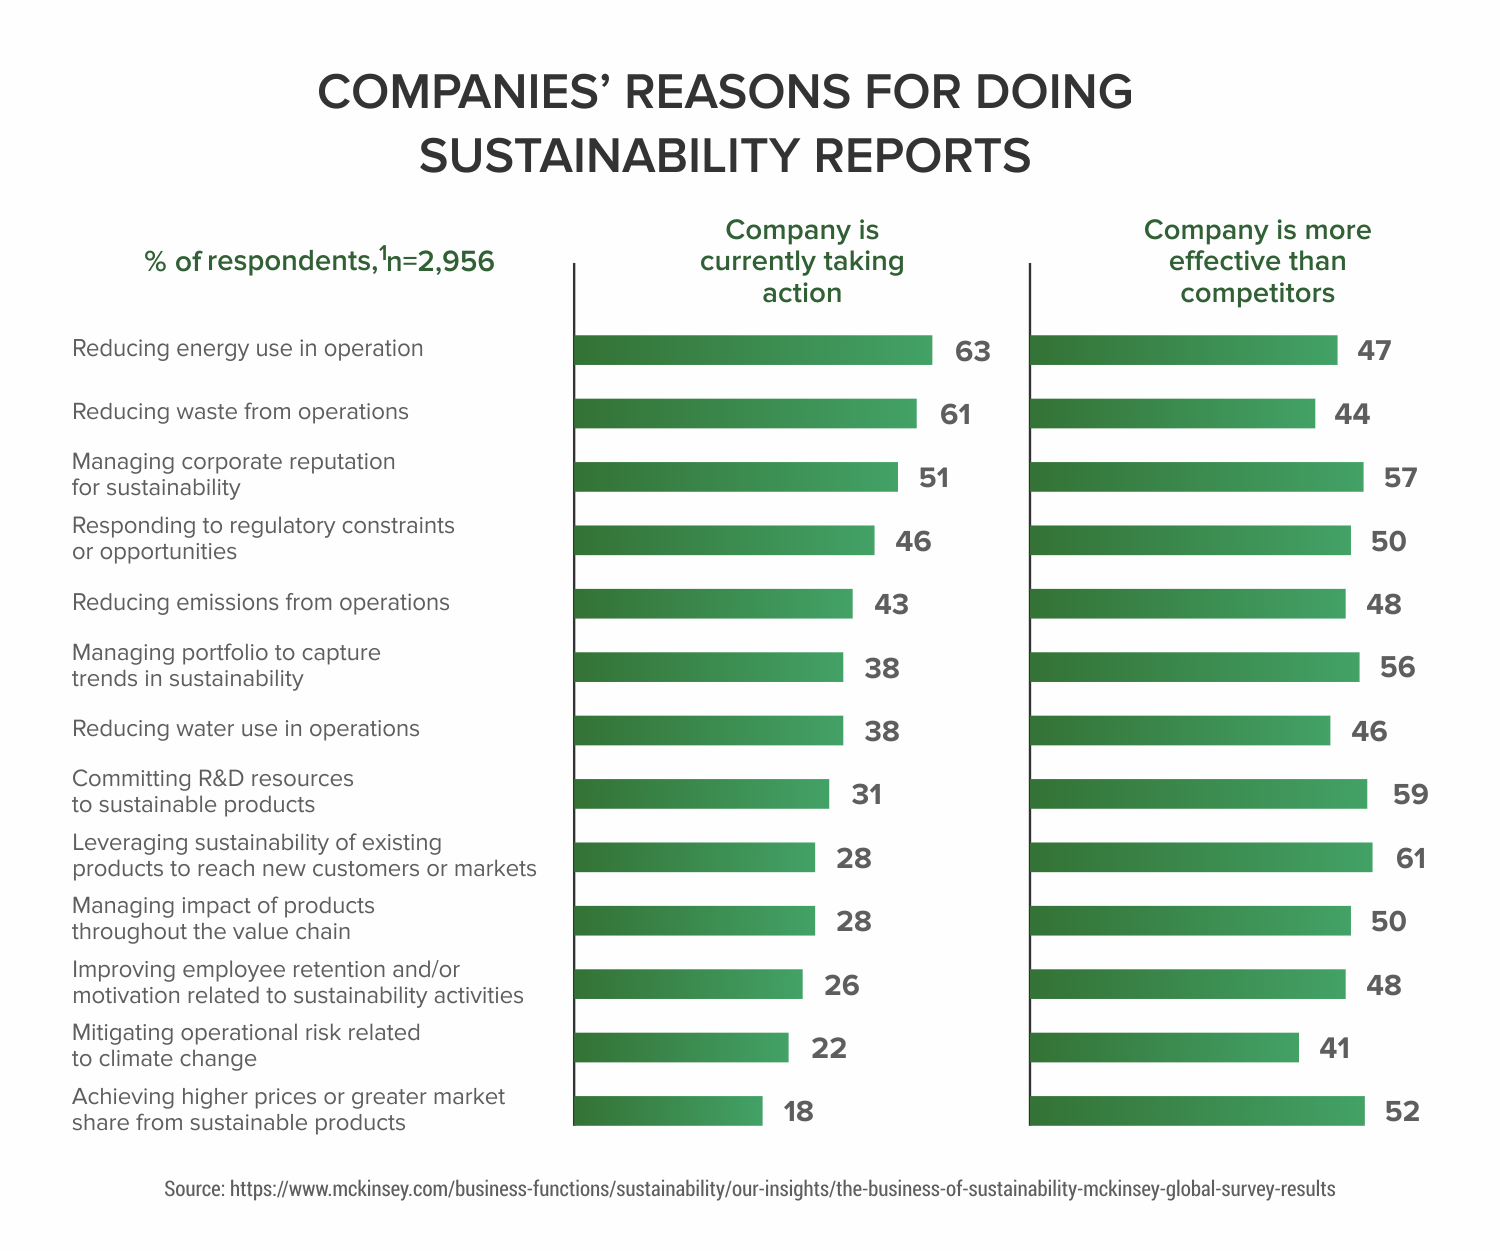 Companies--Reasons-for-Doing-Susyainability-Reports